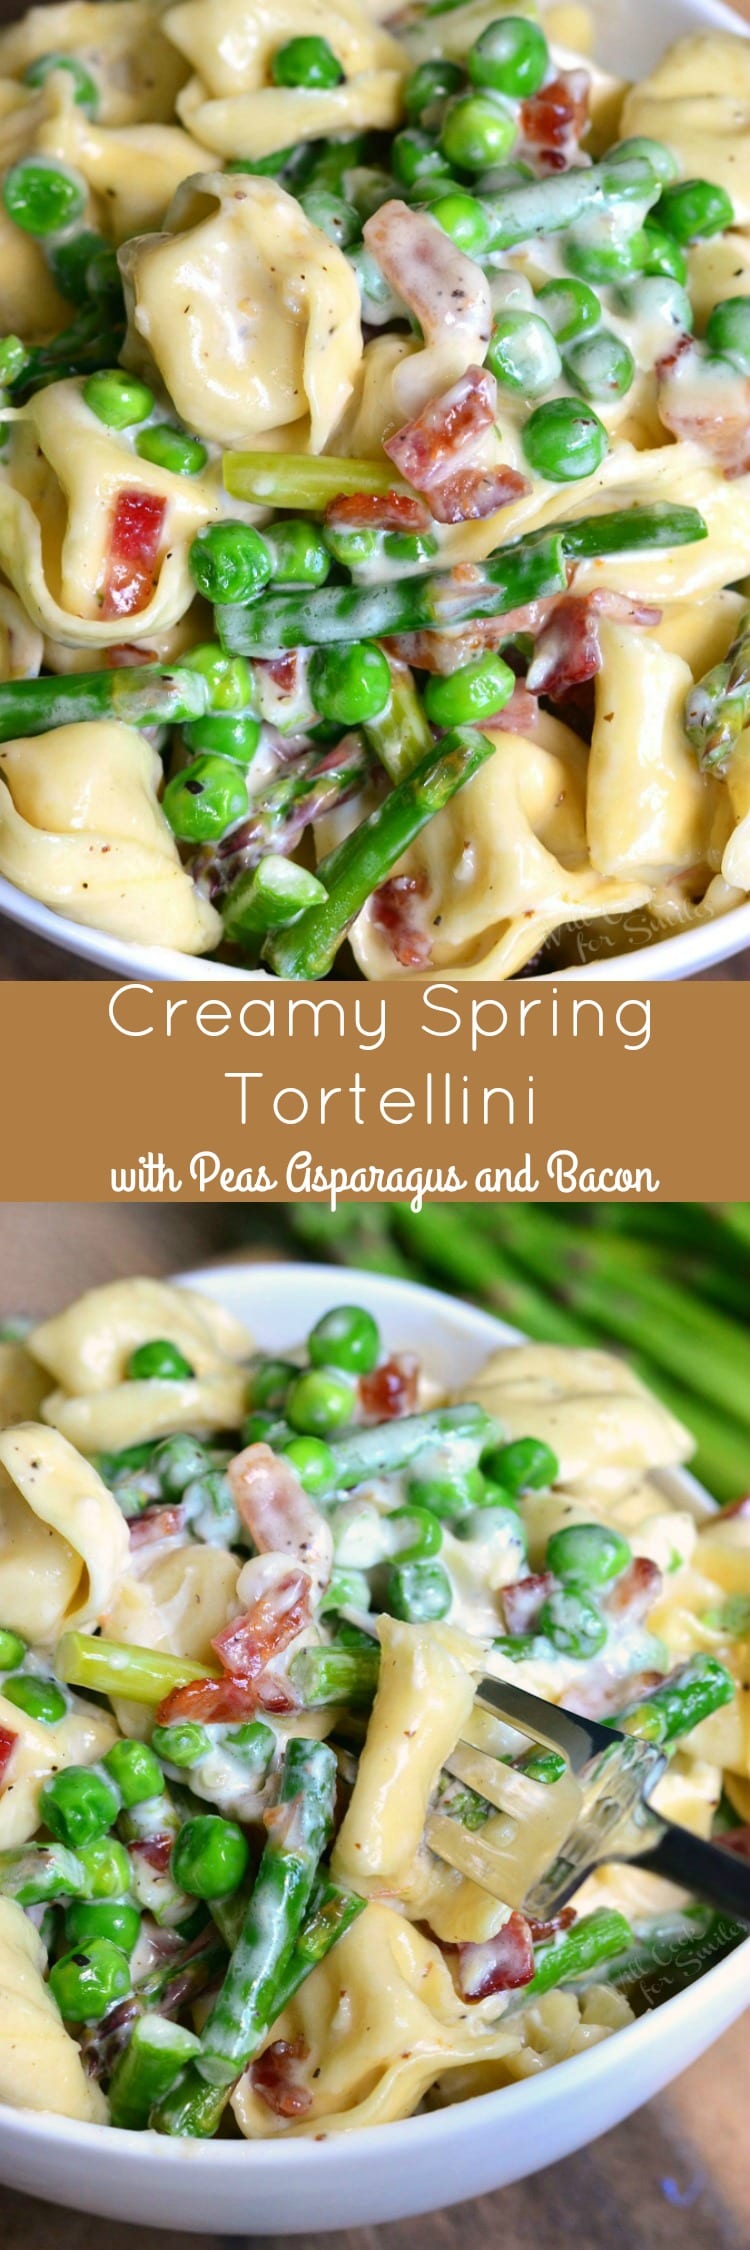 collage of two images of tortellini with bacon and veggies and title.